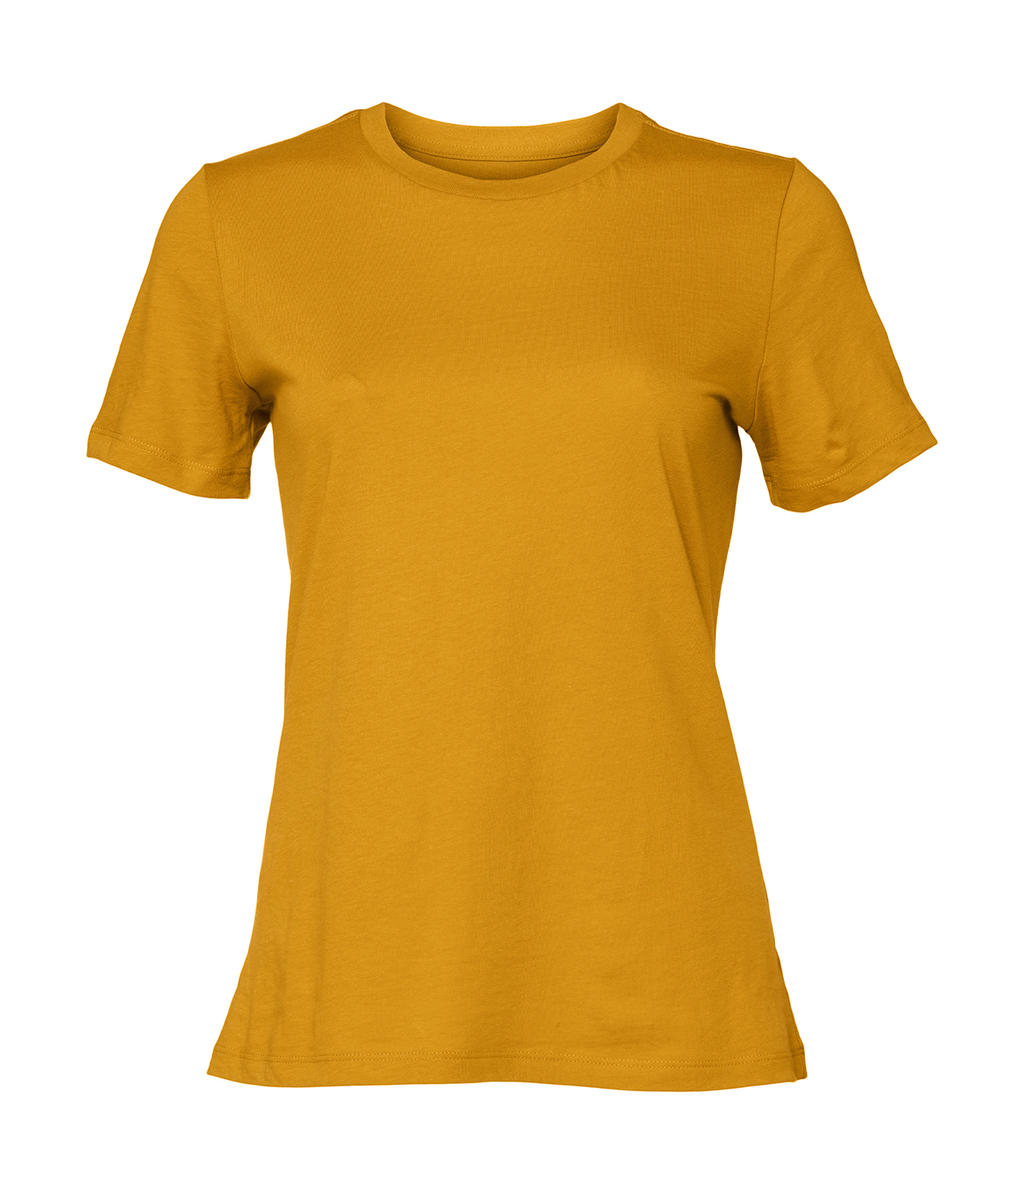  Womens Relaxed Jersey Short Sleeve Tee in Farbe Mustard